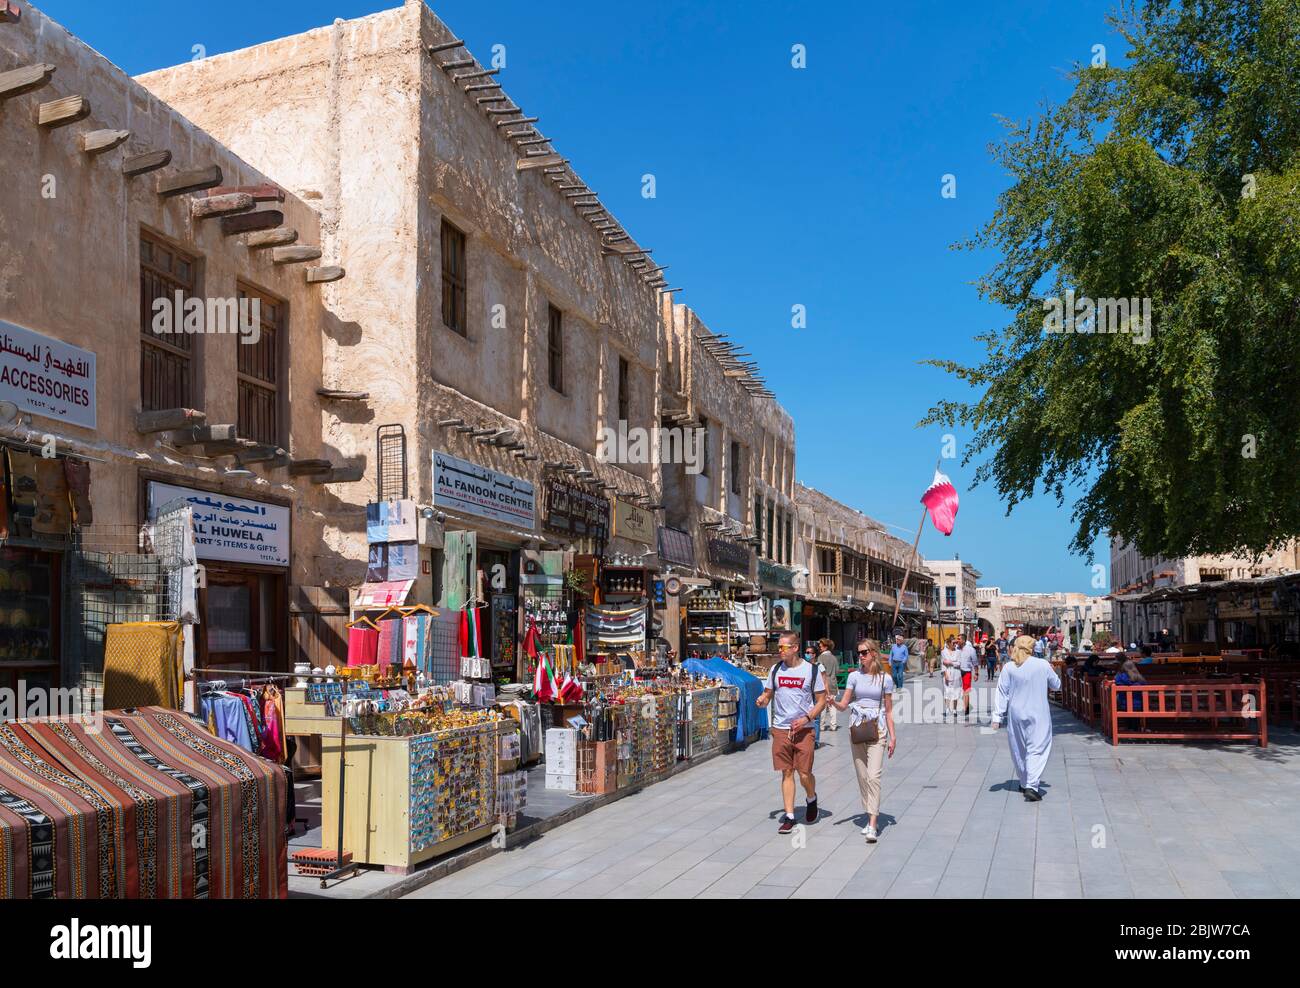 Shops and stalls in Souq Waqif, Doha, Qatar, Middle East Stock Photo